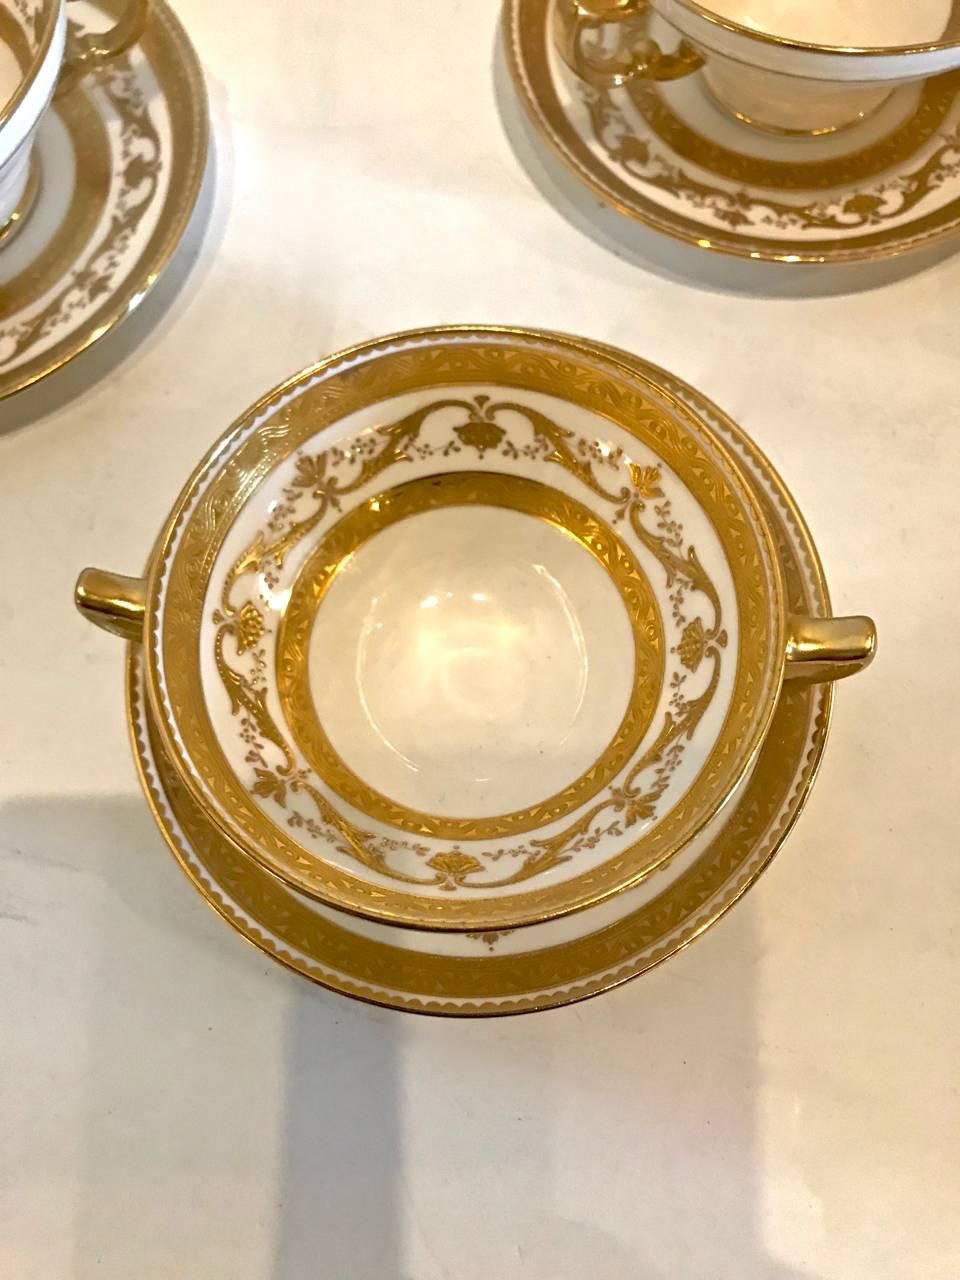 bouillon cup and saucer